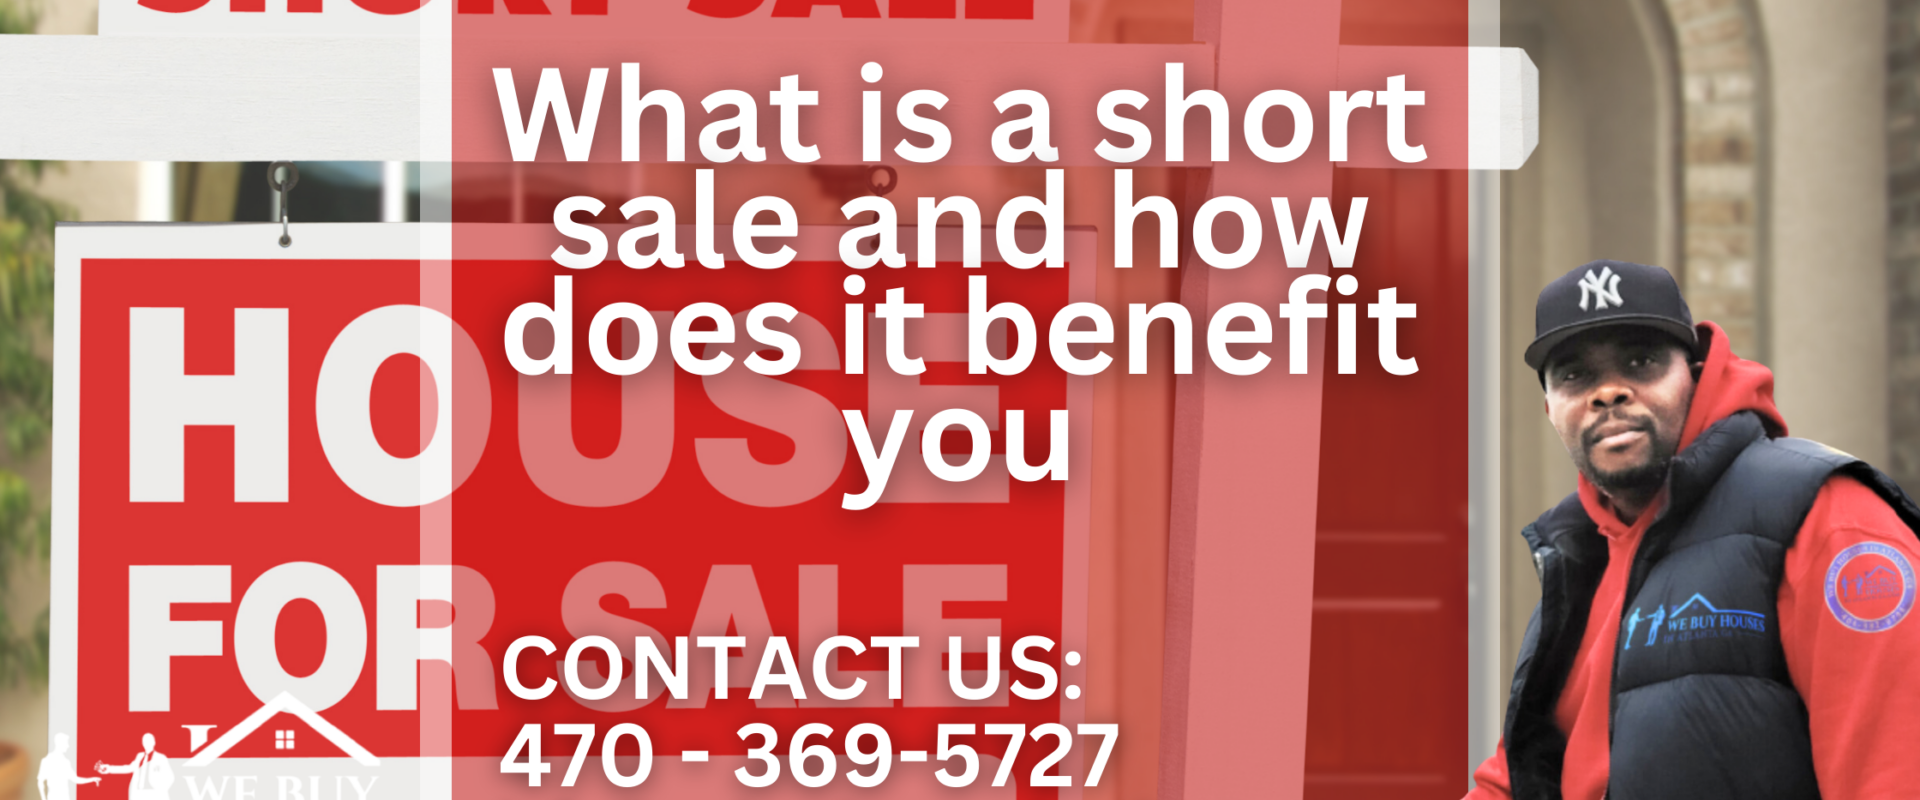 What is a short sale and how does it benefit you